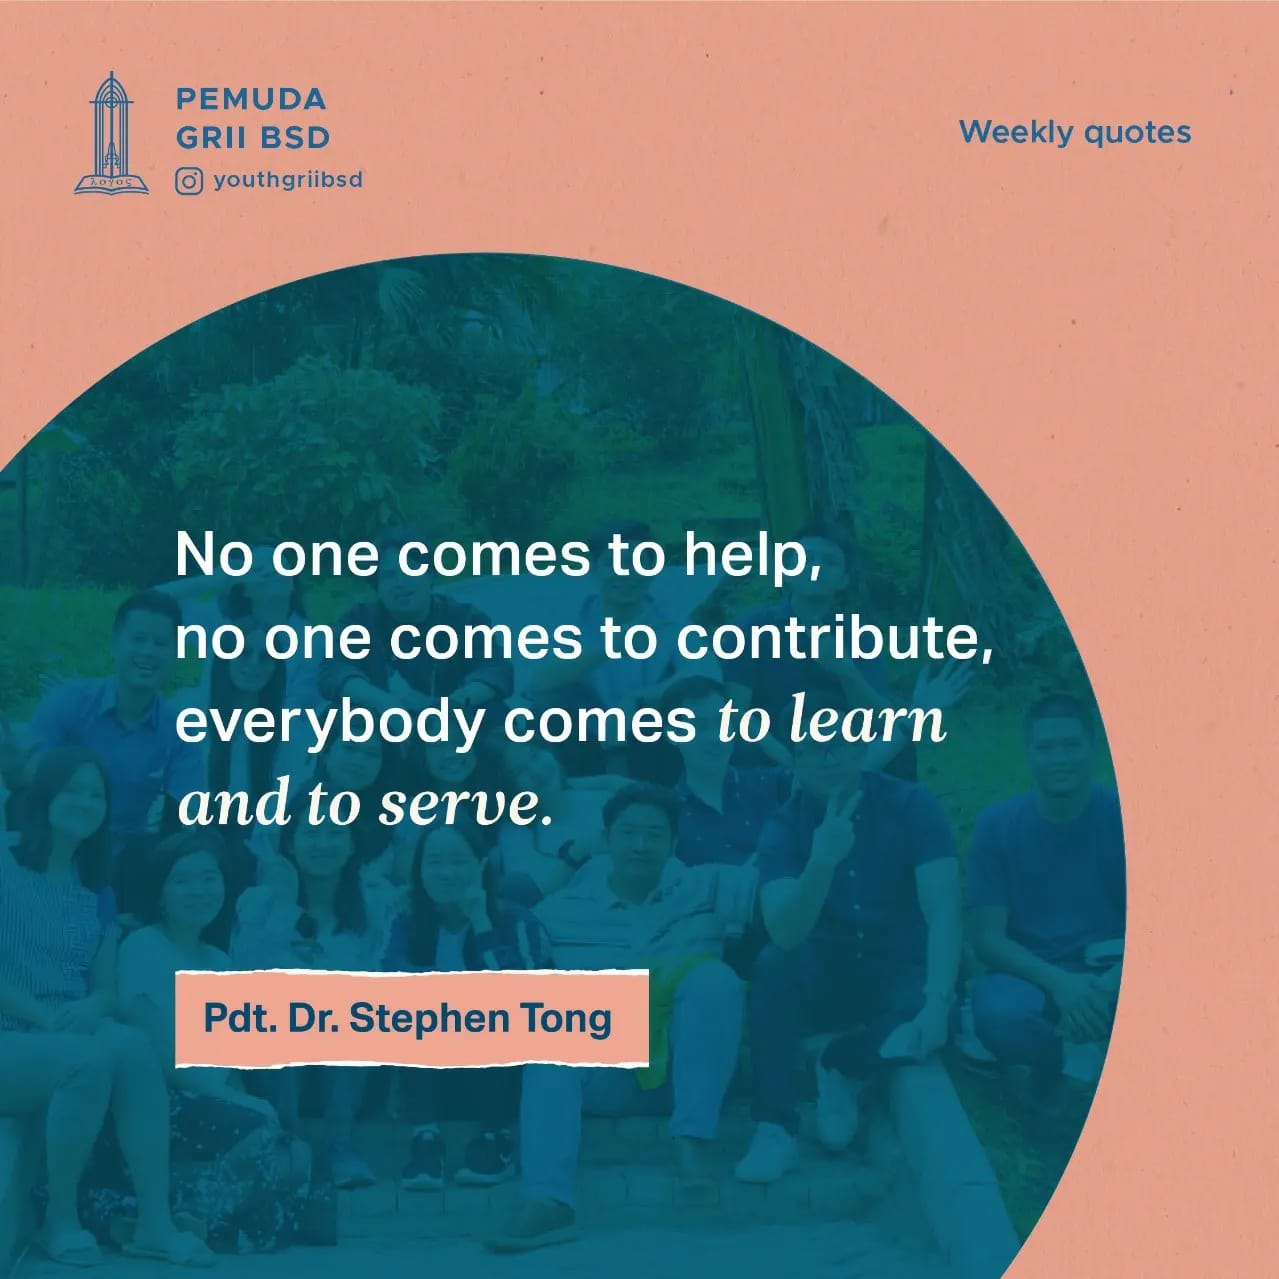 No one comes to help, no one comes to contribute, everybody comes to learn and to serve.